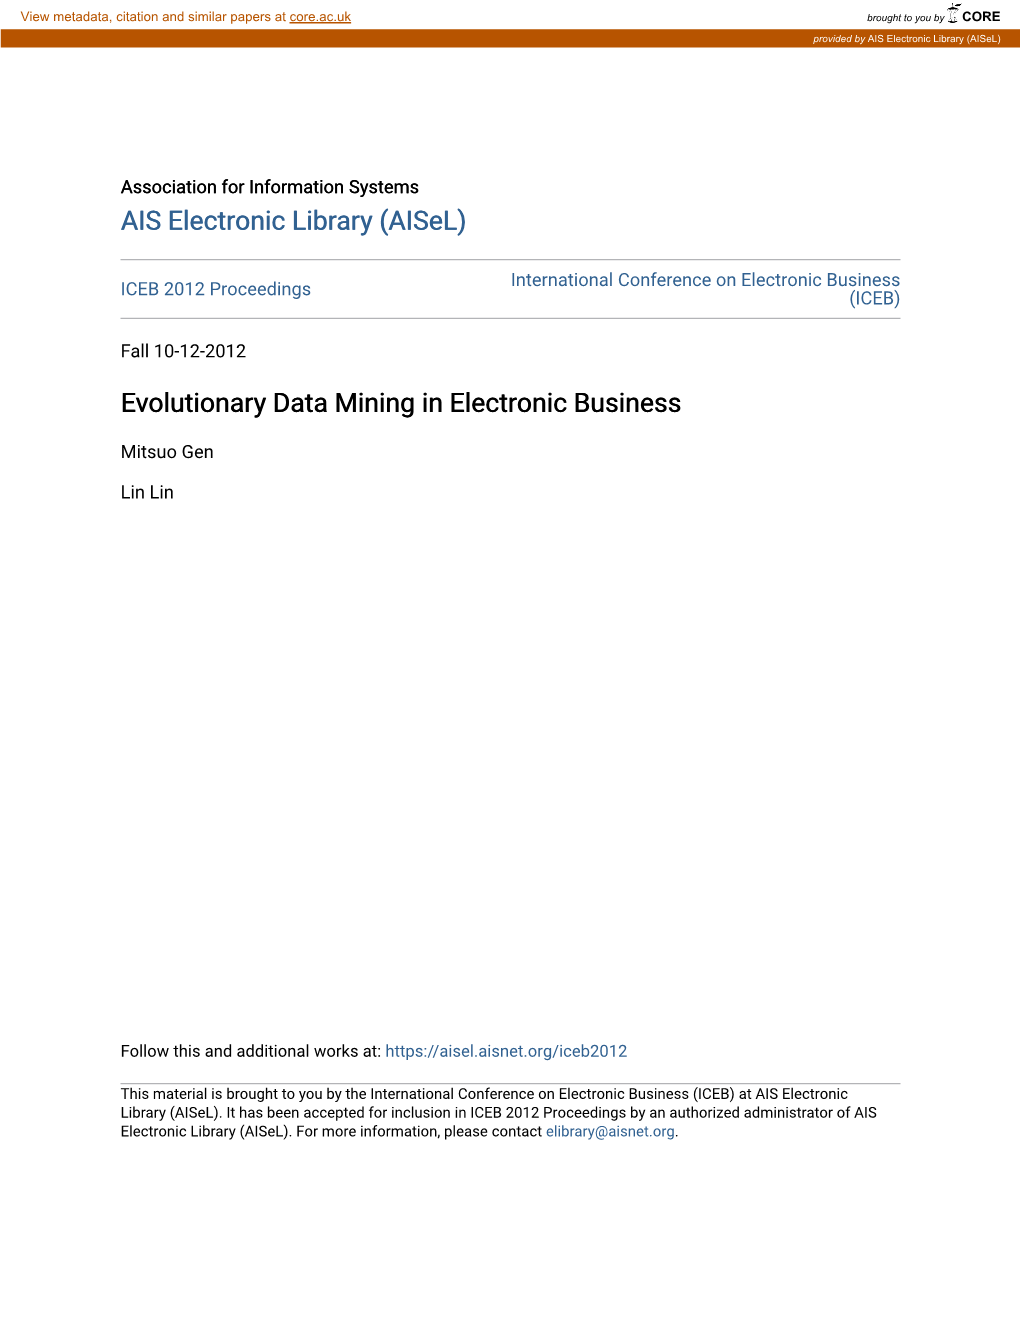 Evolutionary Data Mining in Electronic Business